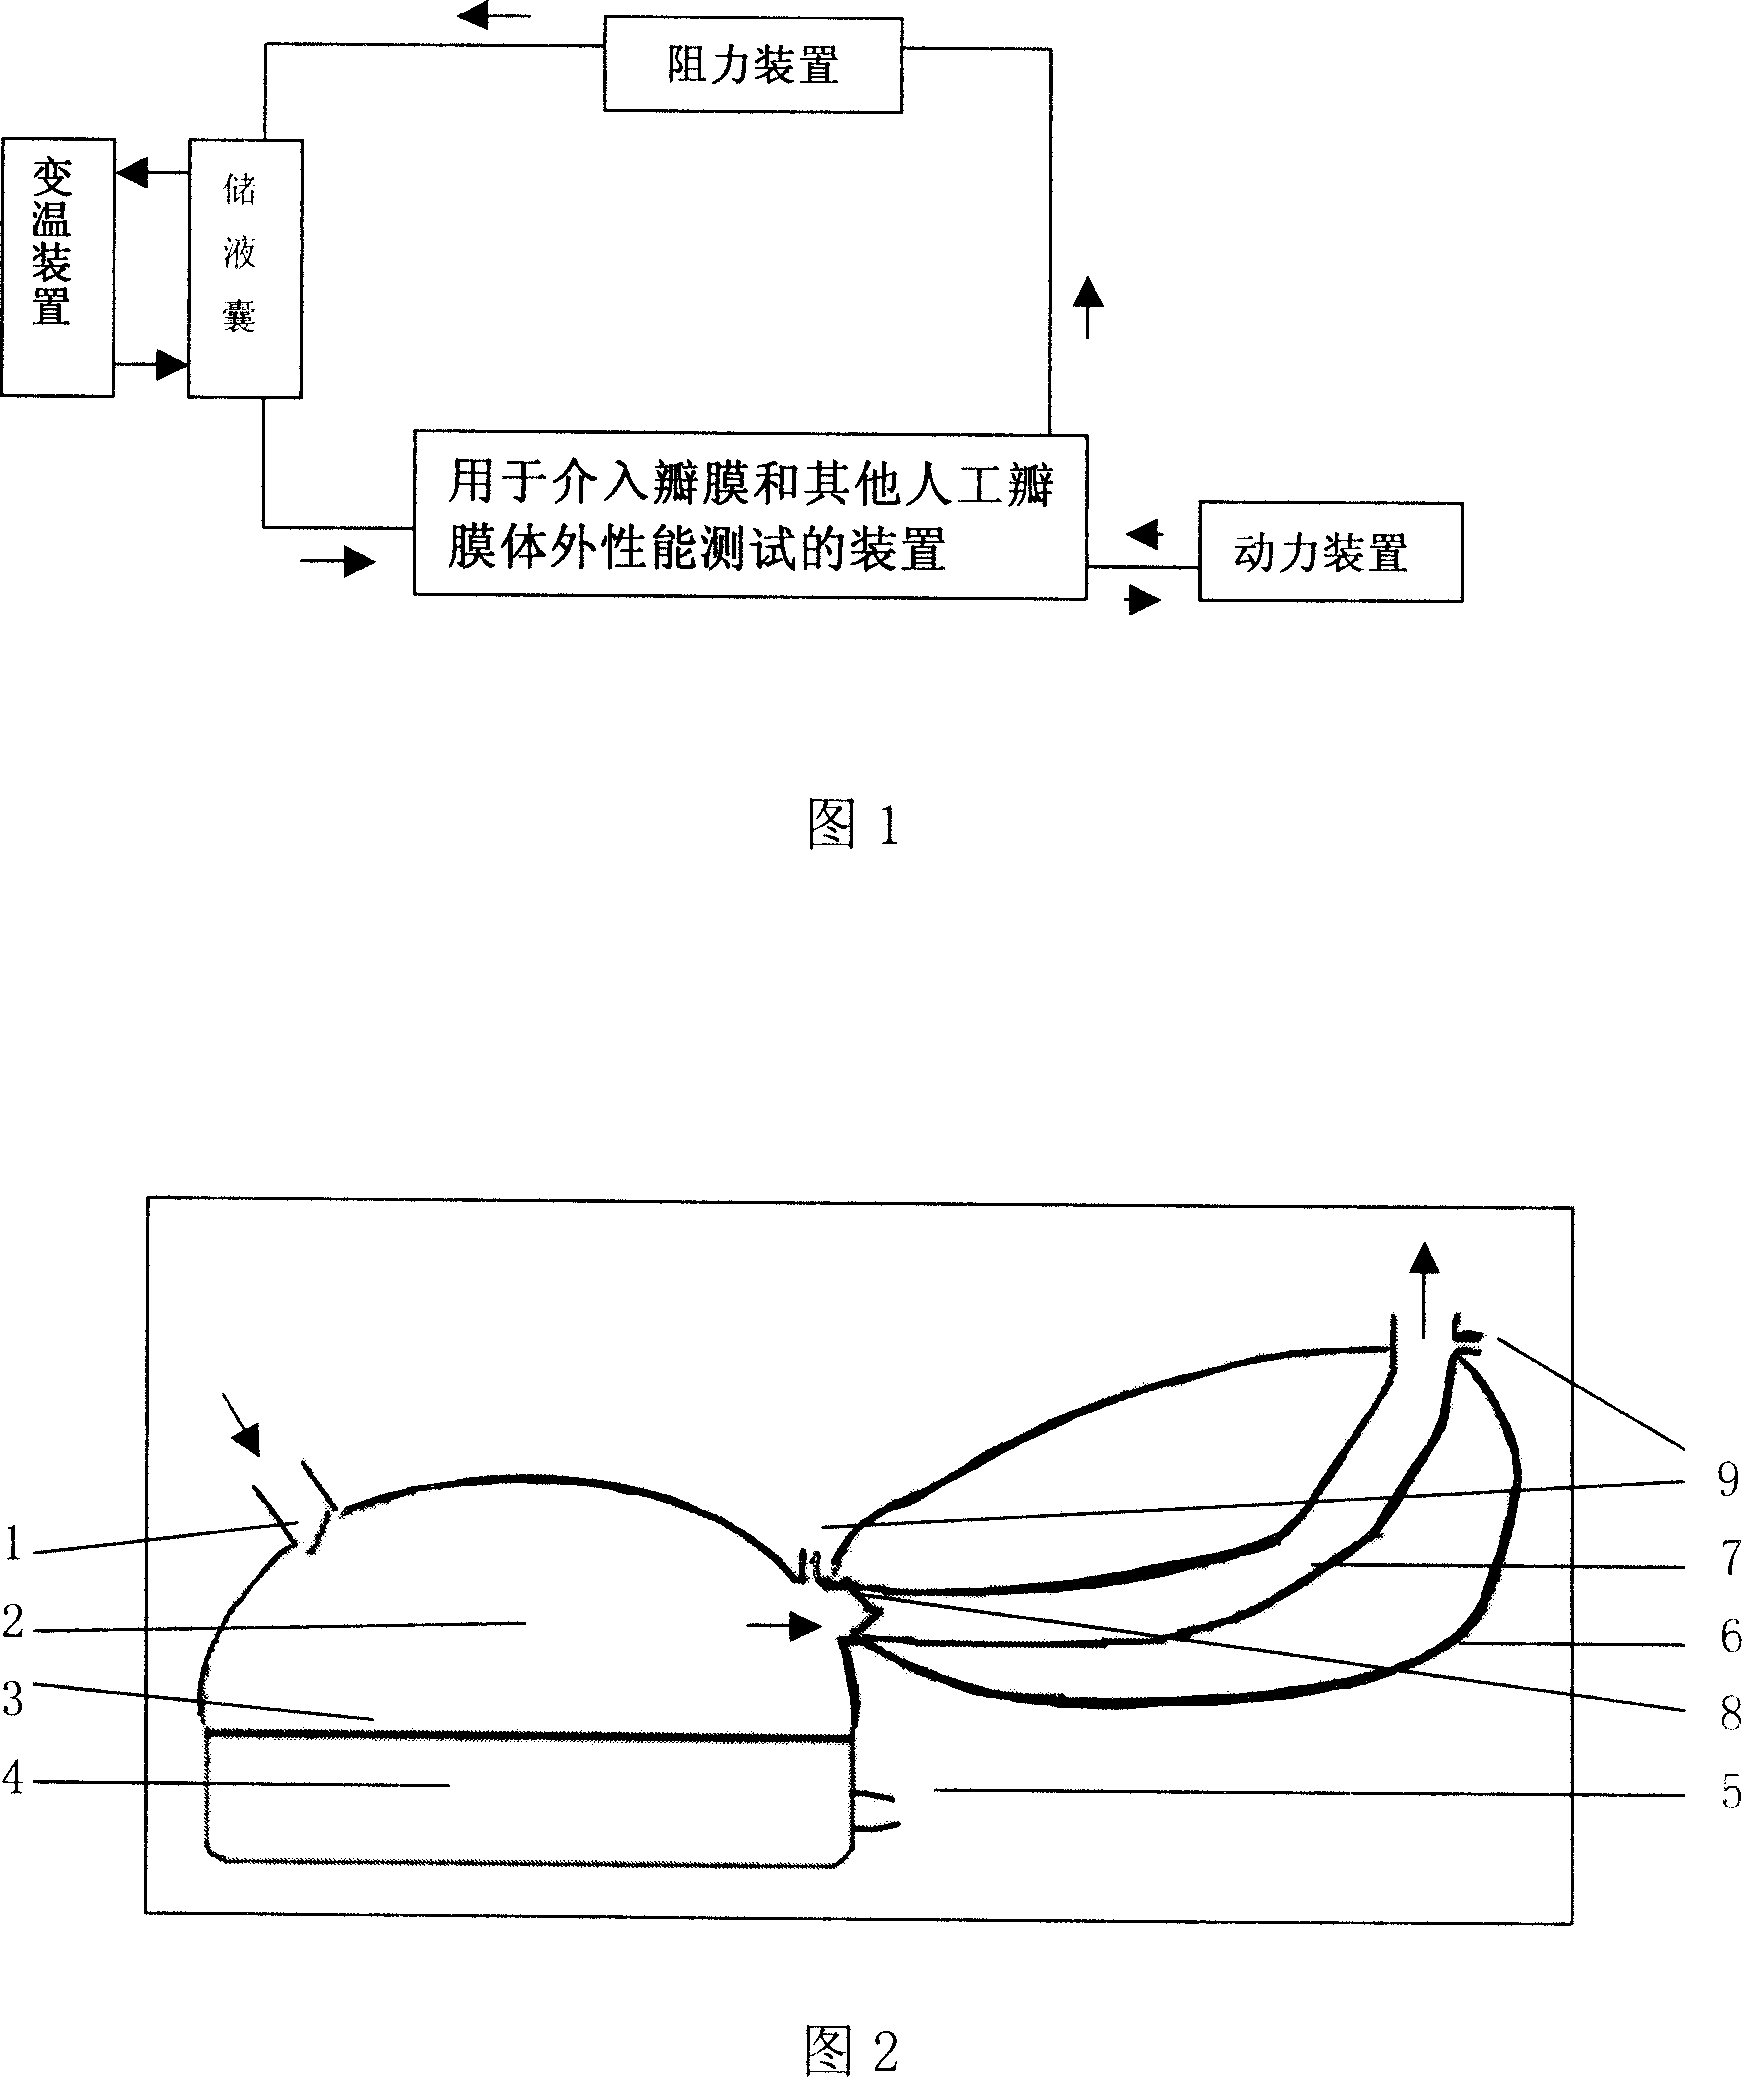 Device for testing external performance of interventional valve and other artificial valve